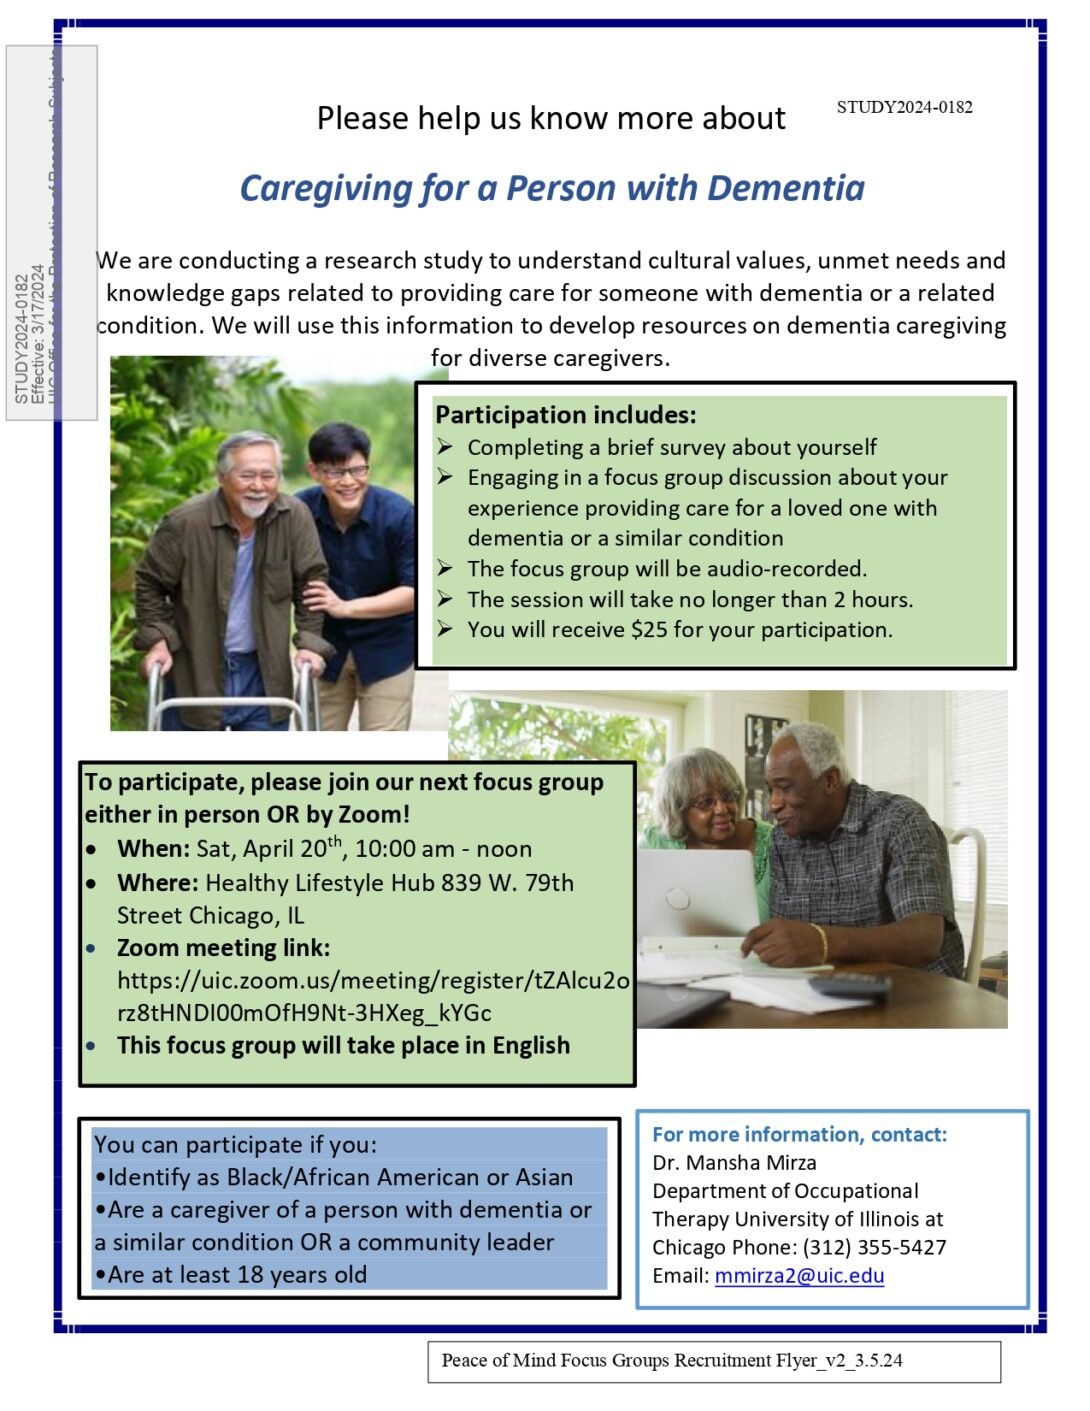 Caregiving for a Person with Dementia